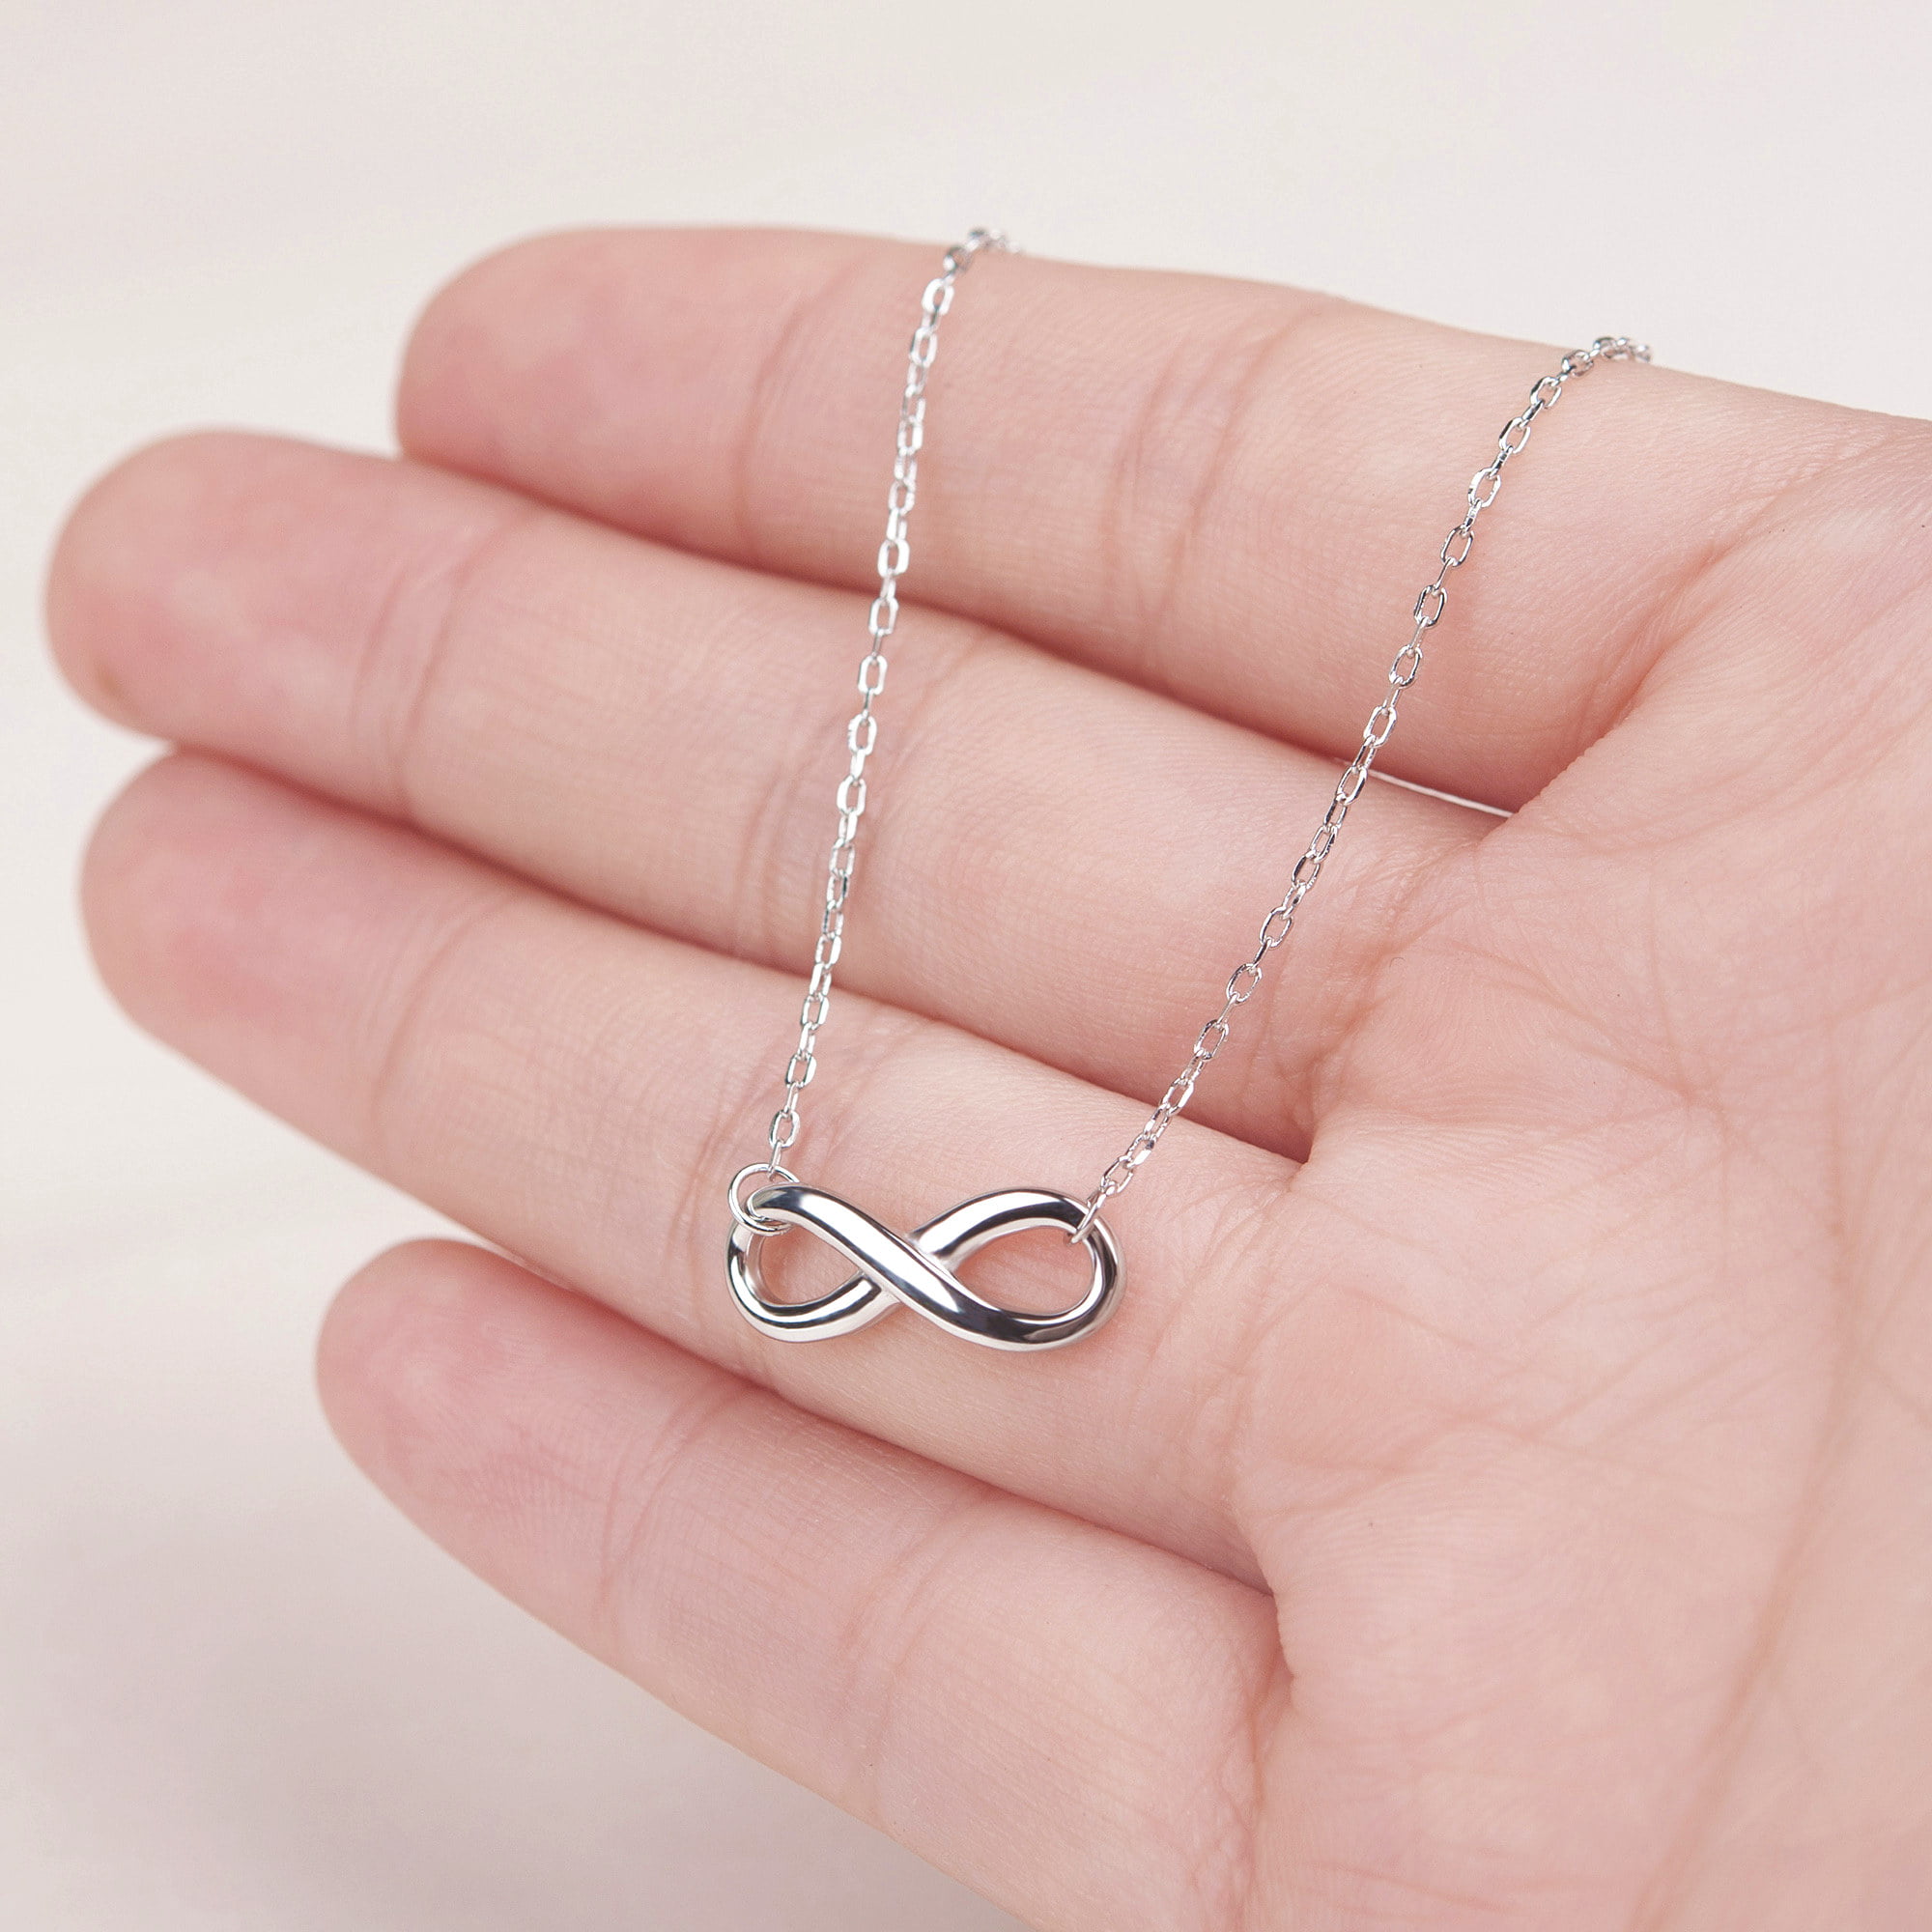 Jewelili Infinity Necklace Diamond Jewelry in Rose Gold Over Sterling Silver